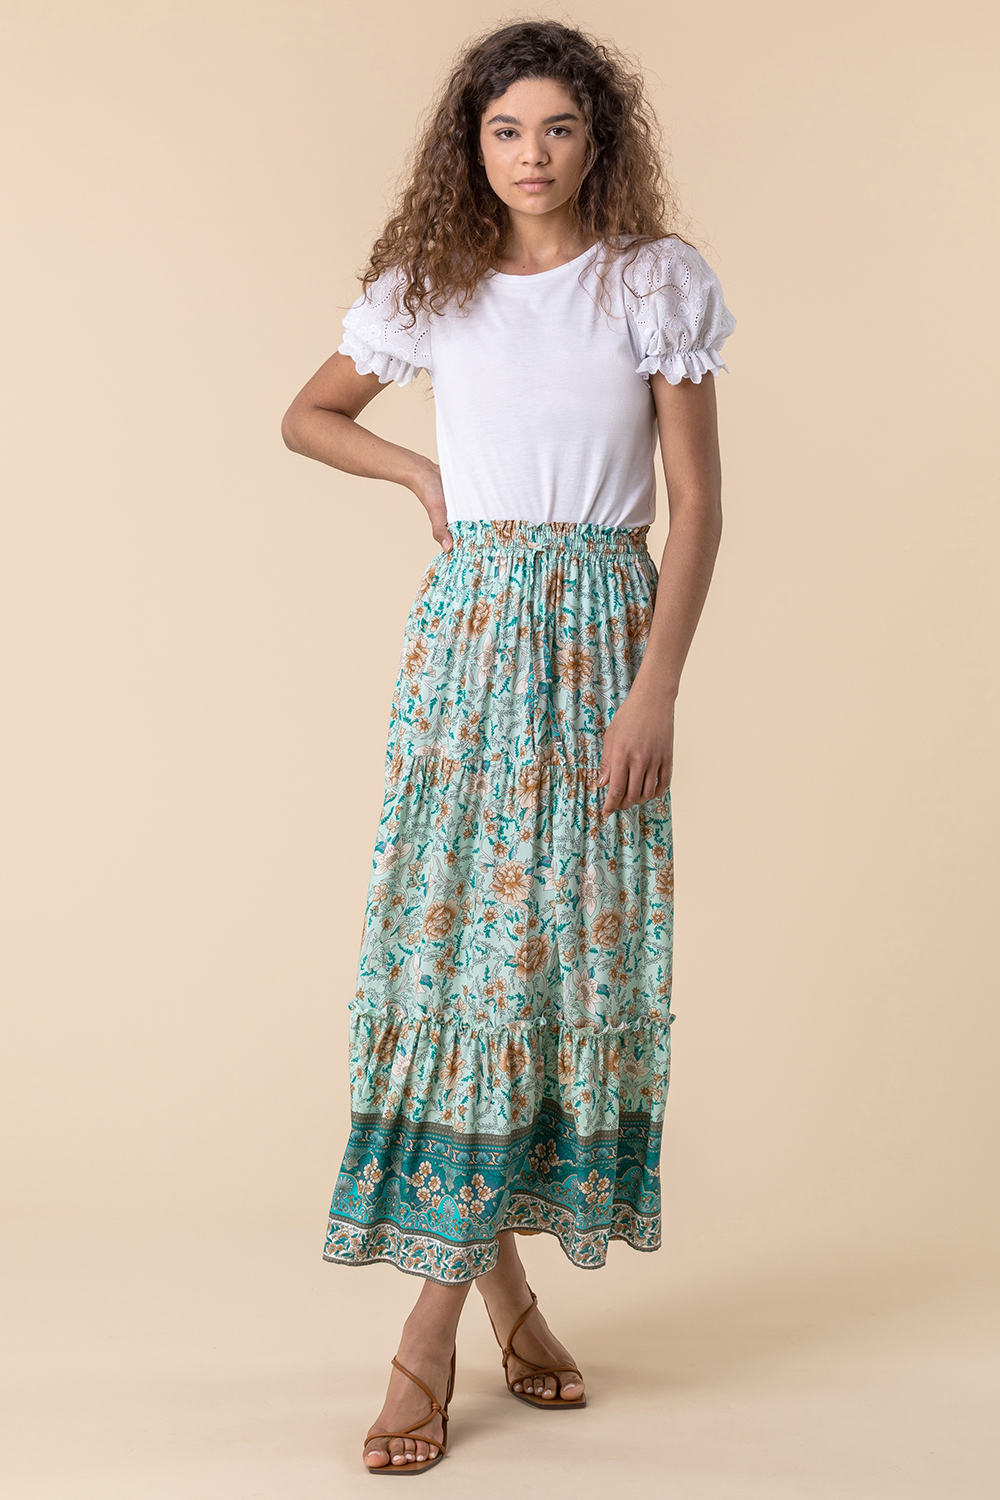 Mint Tiered Floral Print Maxi Skirt, Image 3 of 4